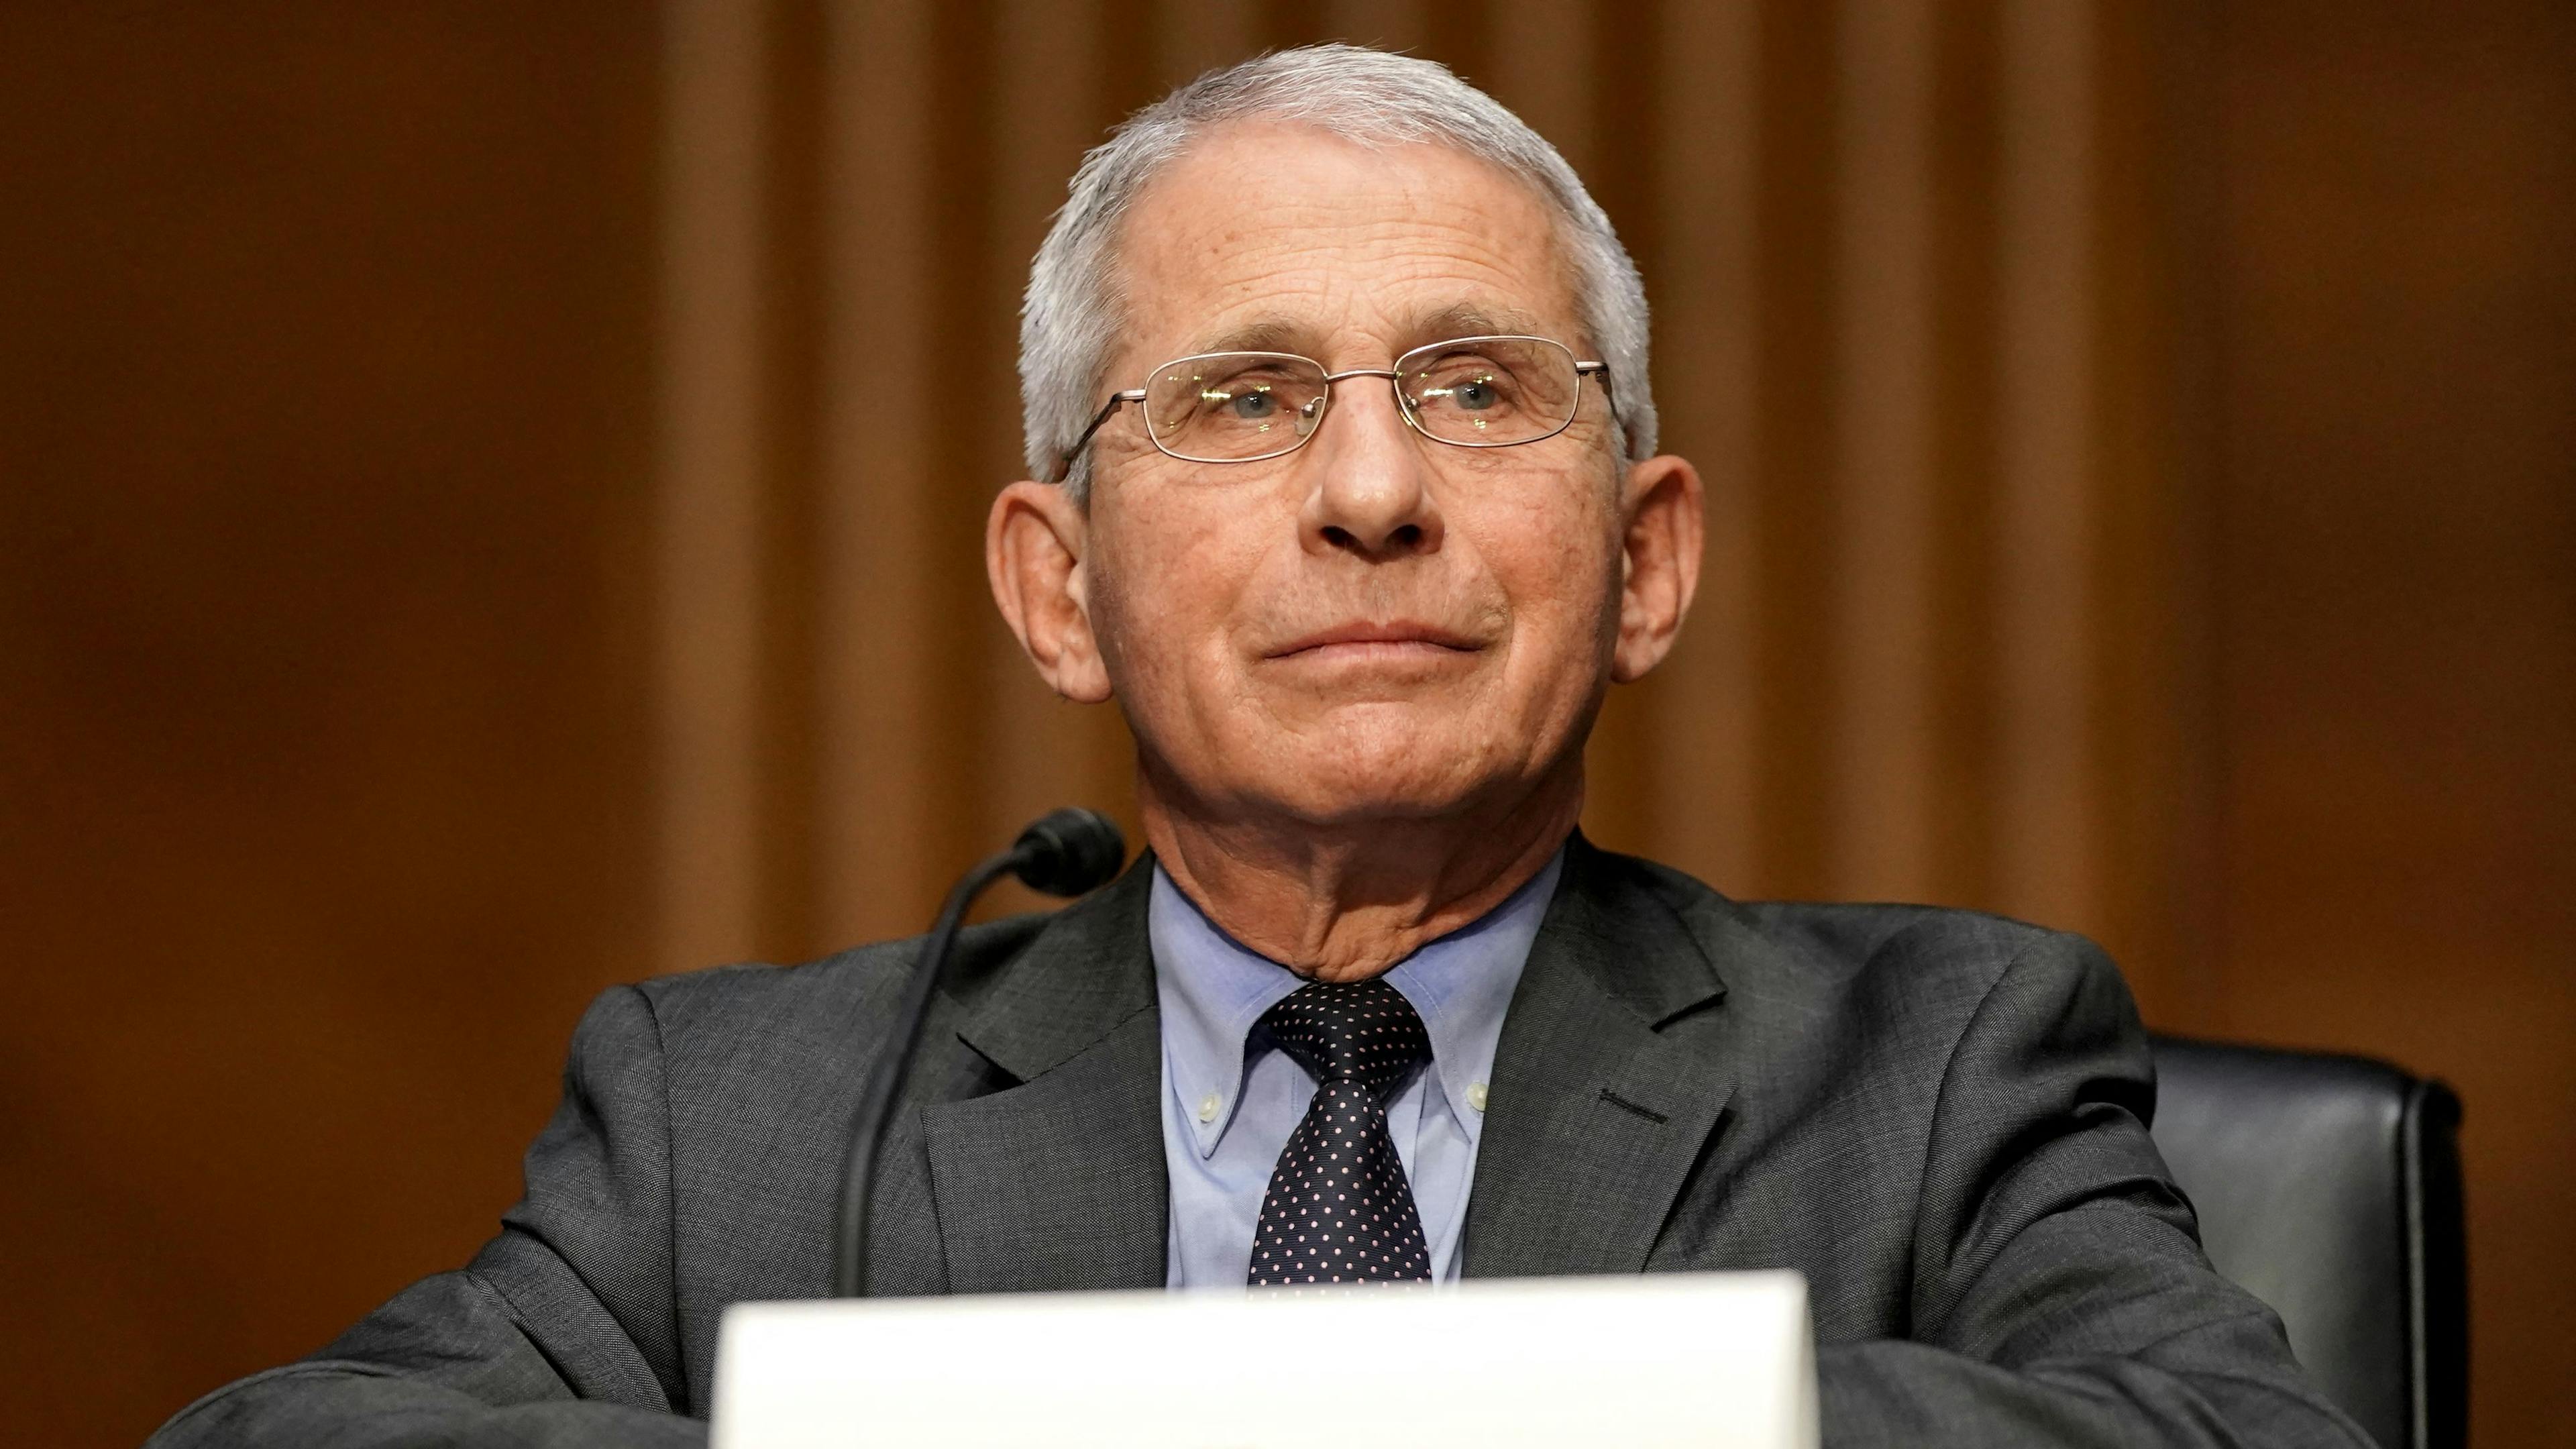 Dr. Anthony Fauci speaks during a Senate hearing on May 11, 2021 at the US Capitol in Washington, DC. 